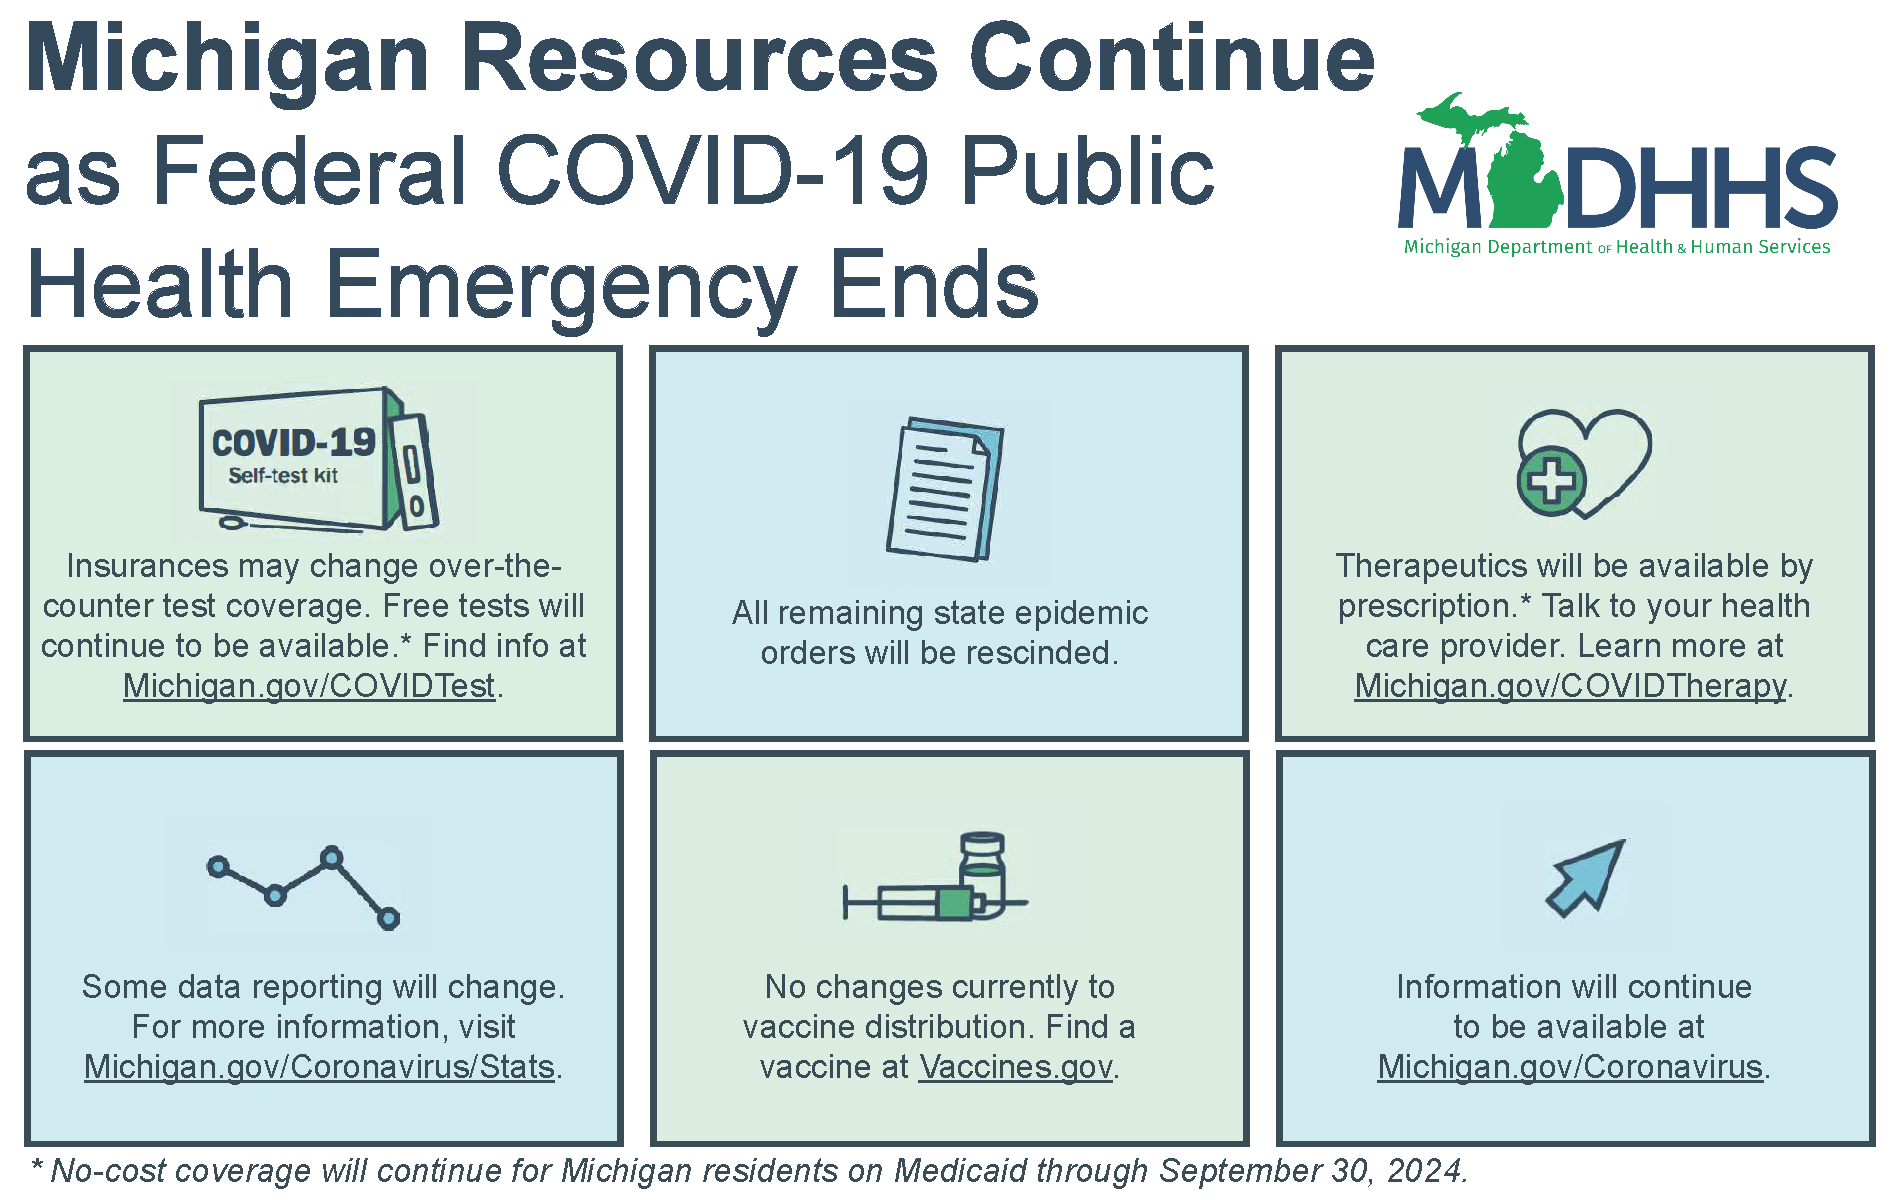 Resources after PHE end